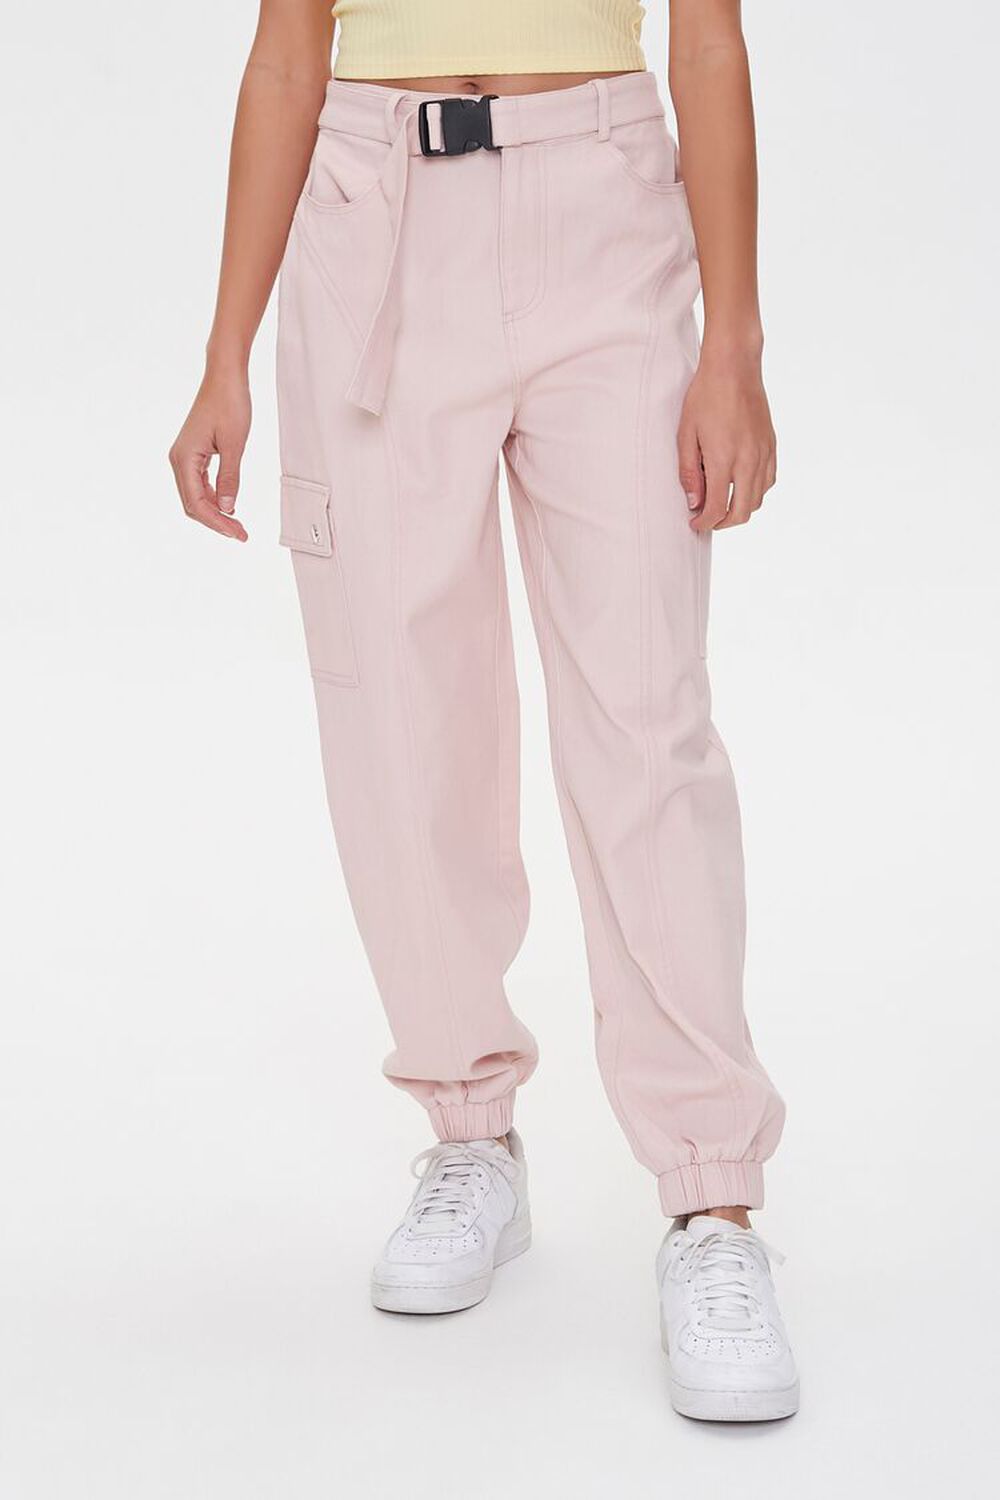 DUSTY PINK Belted Cargo Joggers, image 2